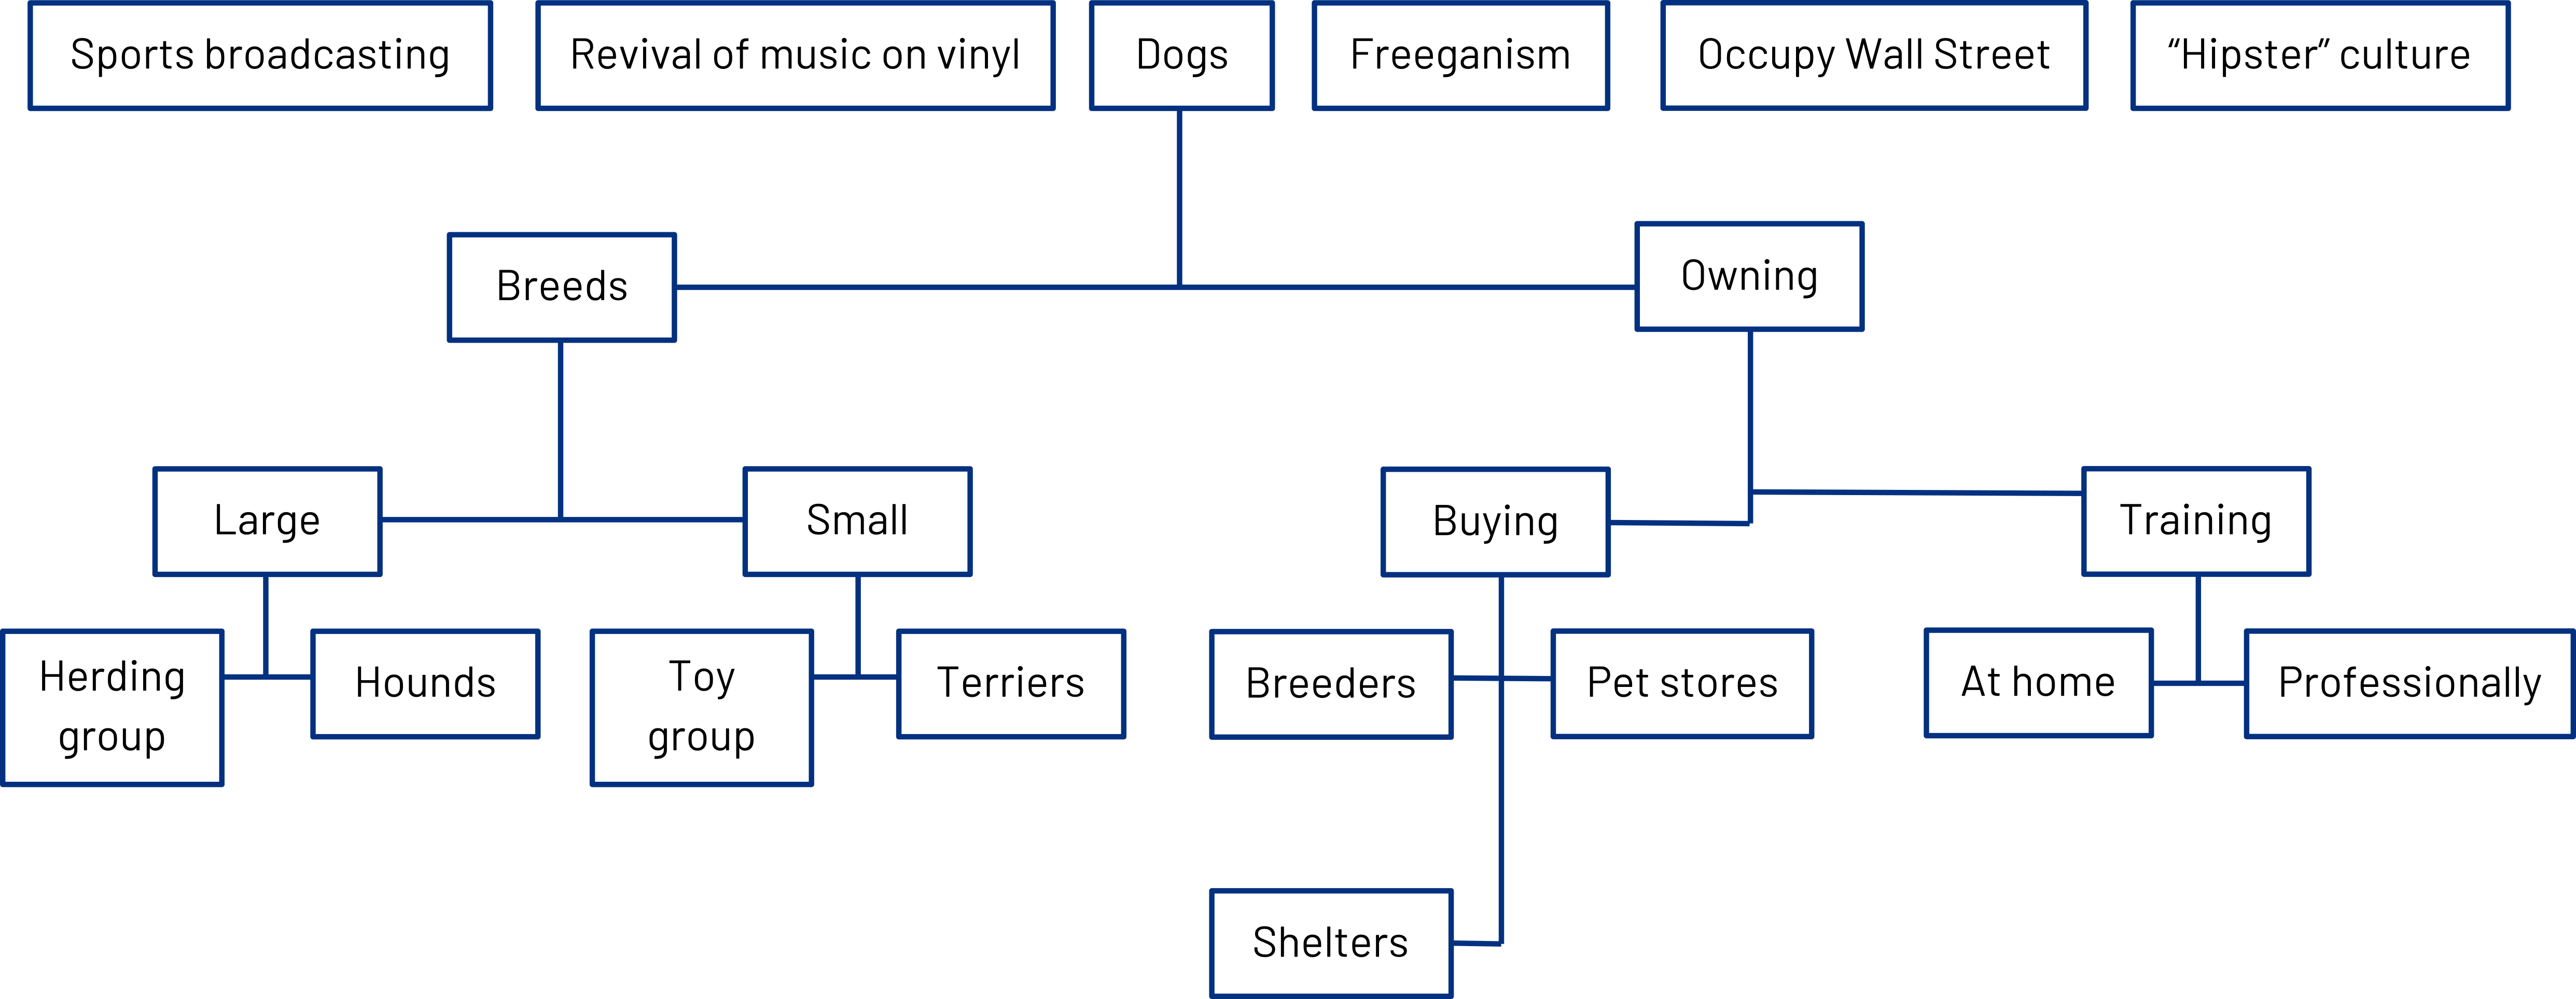 Flow chart. Top row: Sports broadcasting, revival of music on vinyl, dogs, freeganism, occupy Wall Street, "Hipster" culture. Dogs arrow to breeds and owning. Breeds: arrow to large and small. Large: arrow to herding group and hounds. Small: arrow to toy group and terriers. Owning: arrow to buying and training. Buying: Arrow to breeders and pet stores and shelters. Training: arrow to at home and professionally.